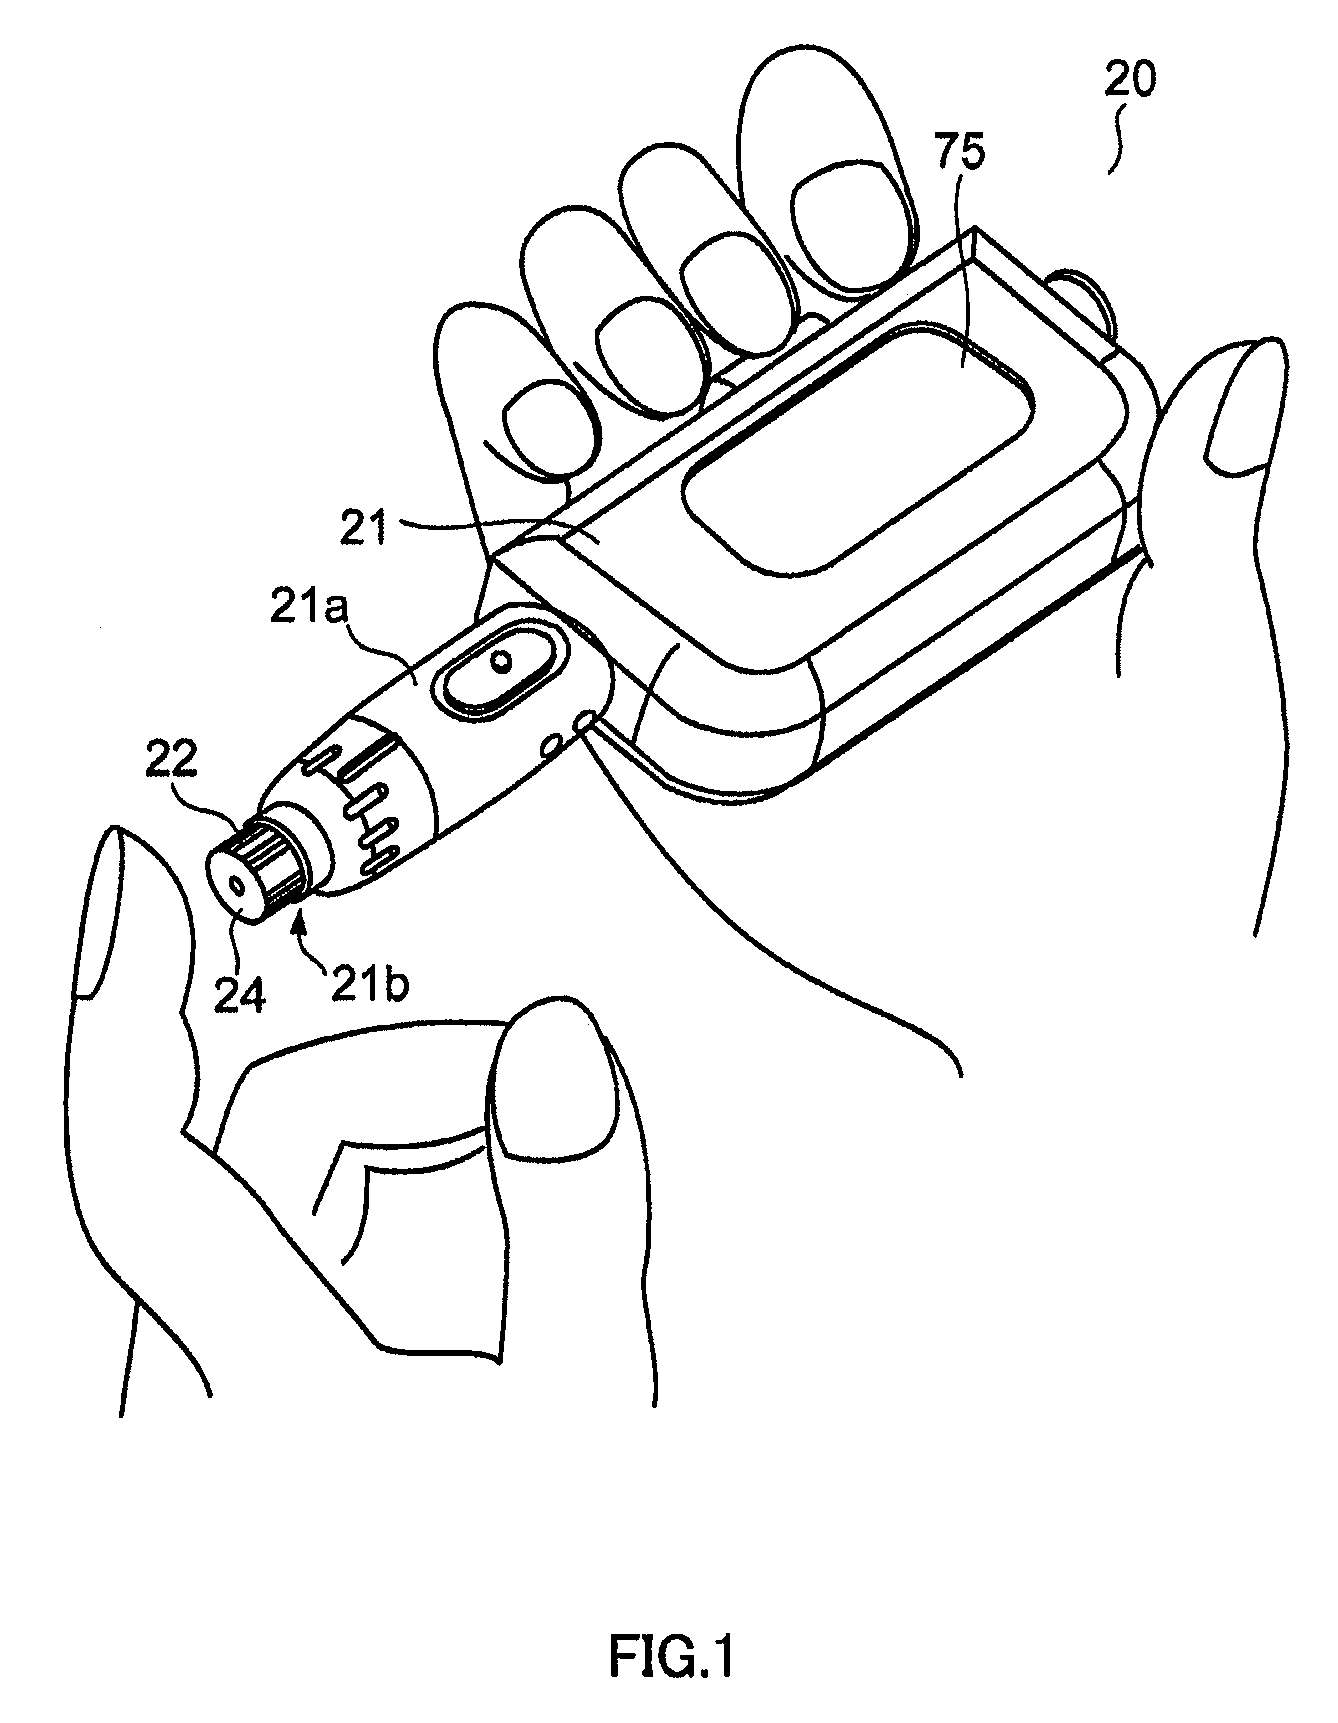 Blood test method and blood test apparatus